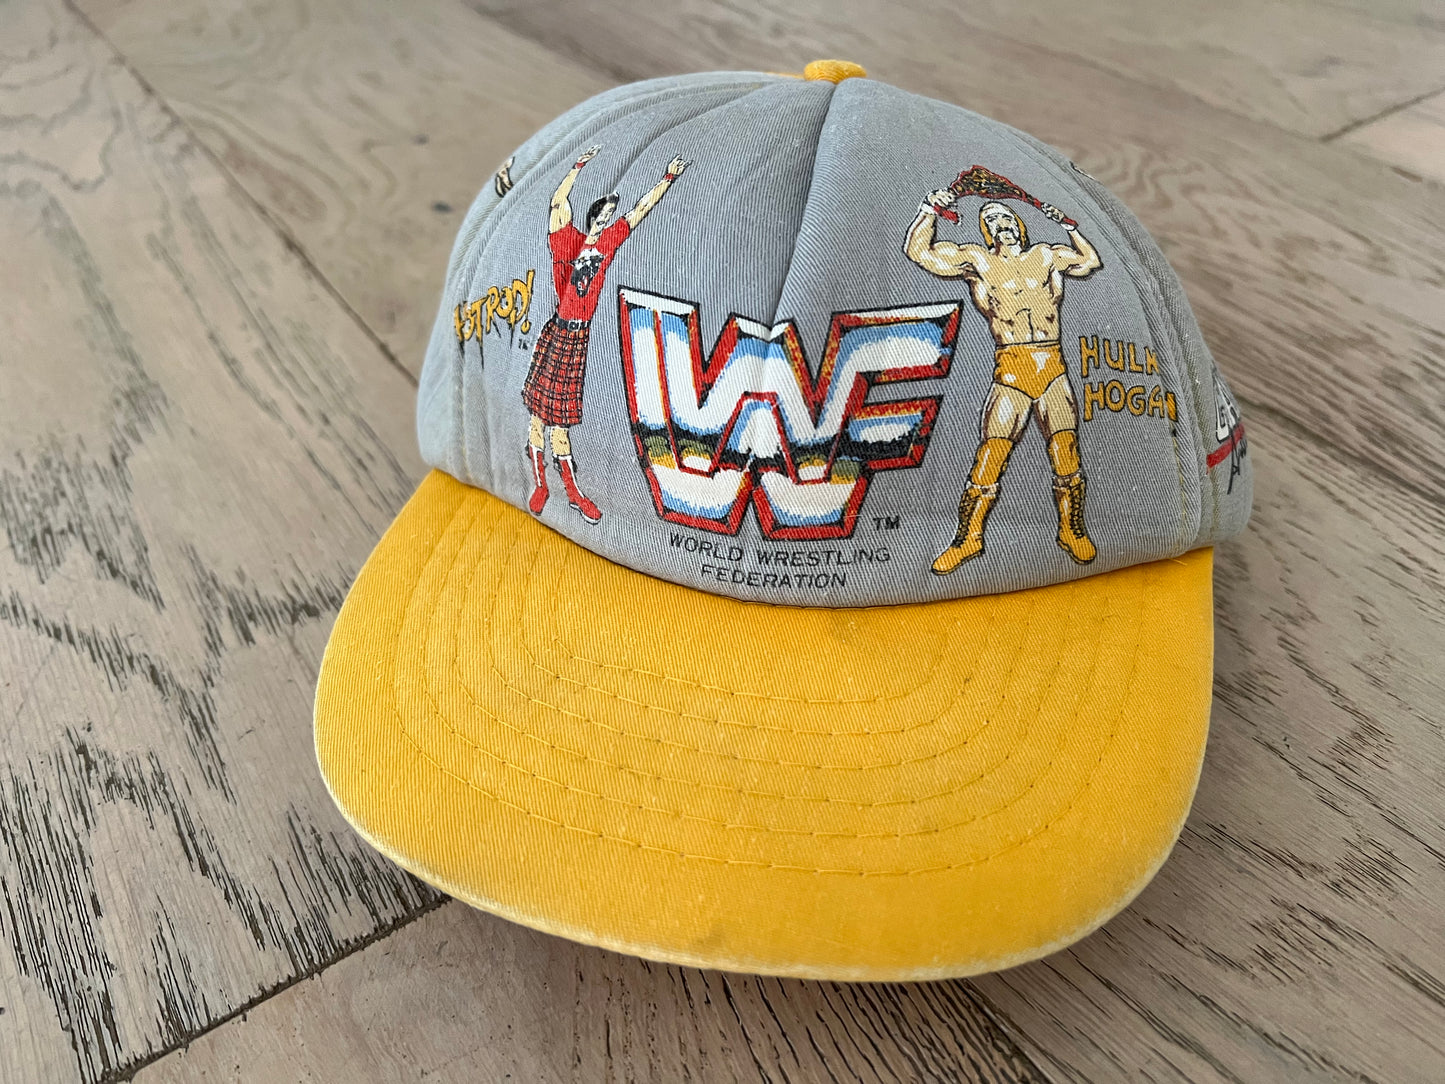 1985 WWF Kid’s Hat featuring World Wrestling Federation Heavyweight Champion Hulk Hogan, “Superfly” Jimmy Snuka, Andre the Giant and “Rowdy” Roddy Piper